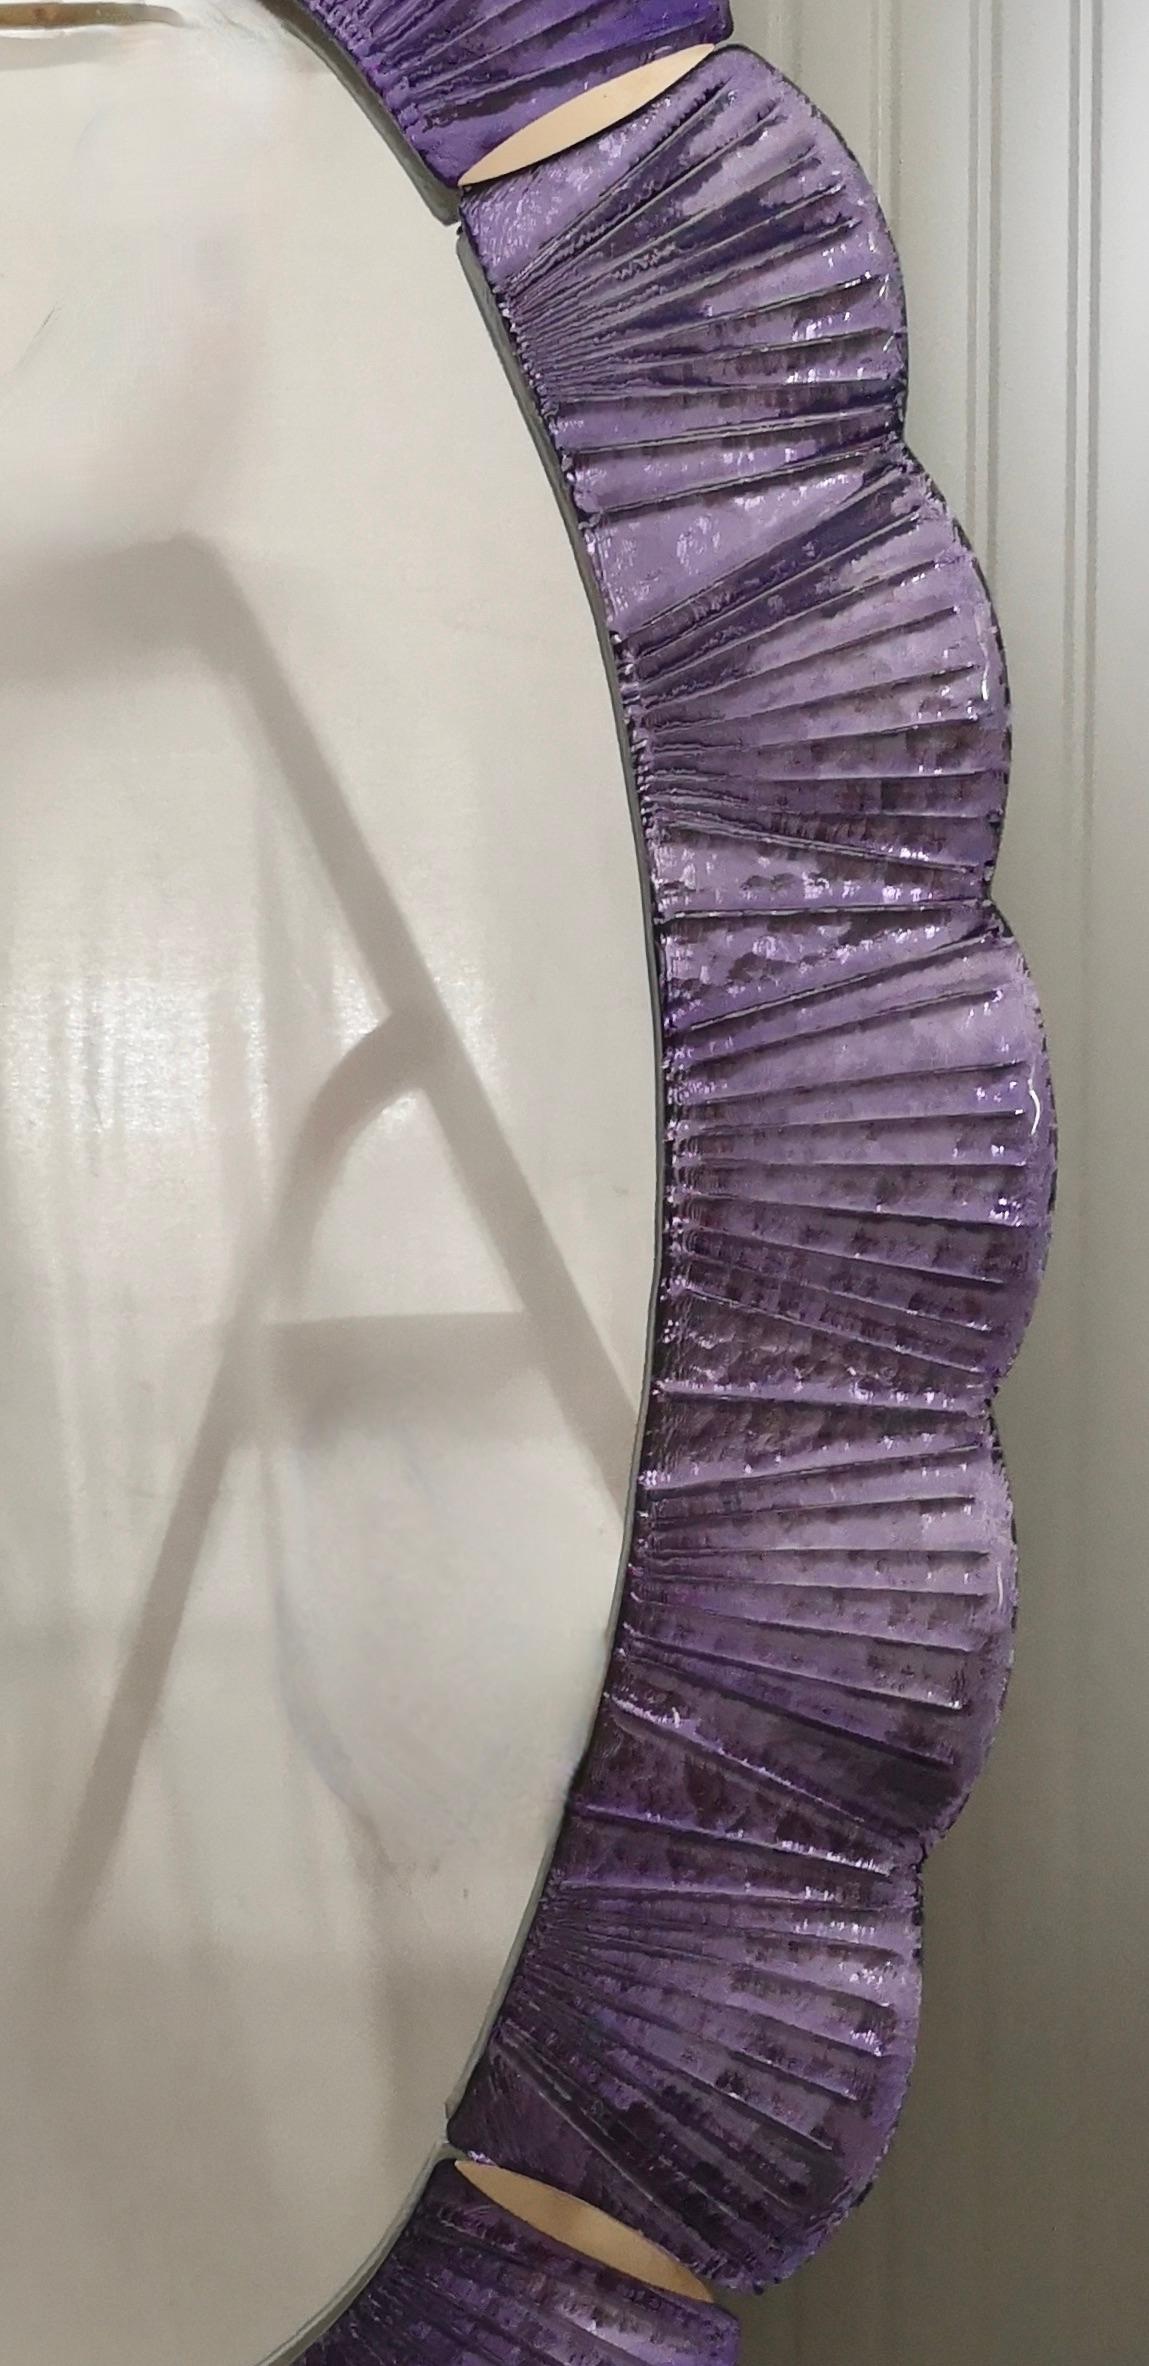 Stunning mirror in blazing violet color Murano glass, Venice. A mirror that alone will furnish your home environment.

The mirror has a rear structure in wood, on which four Murano glass sections are mounted to form an oval as in the photograph. The